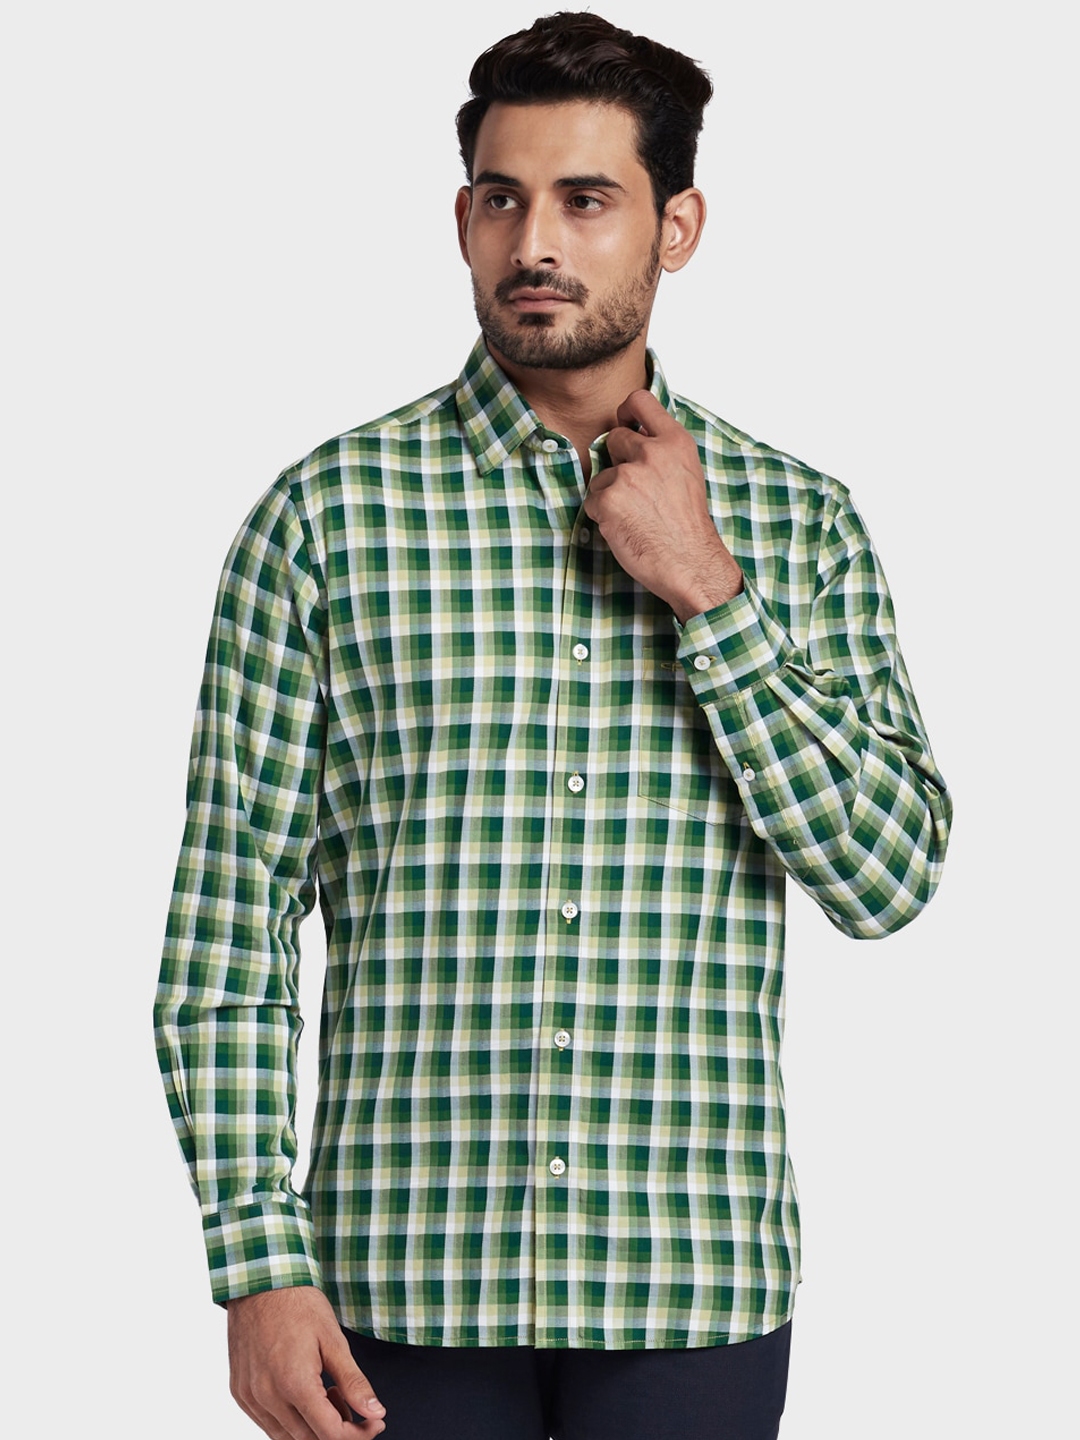 Buy ColorPlus Men Green & Beige Tailored Fit Checked Casual Shirt ...